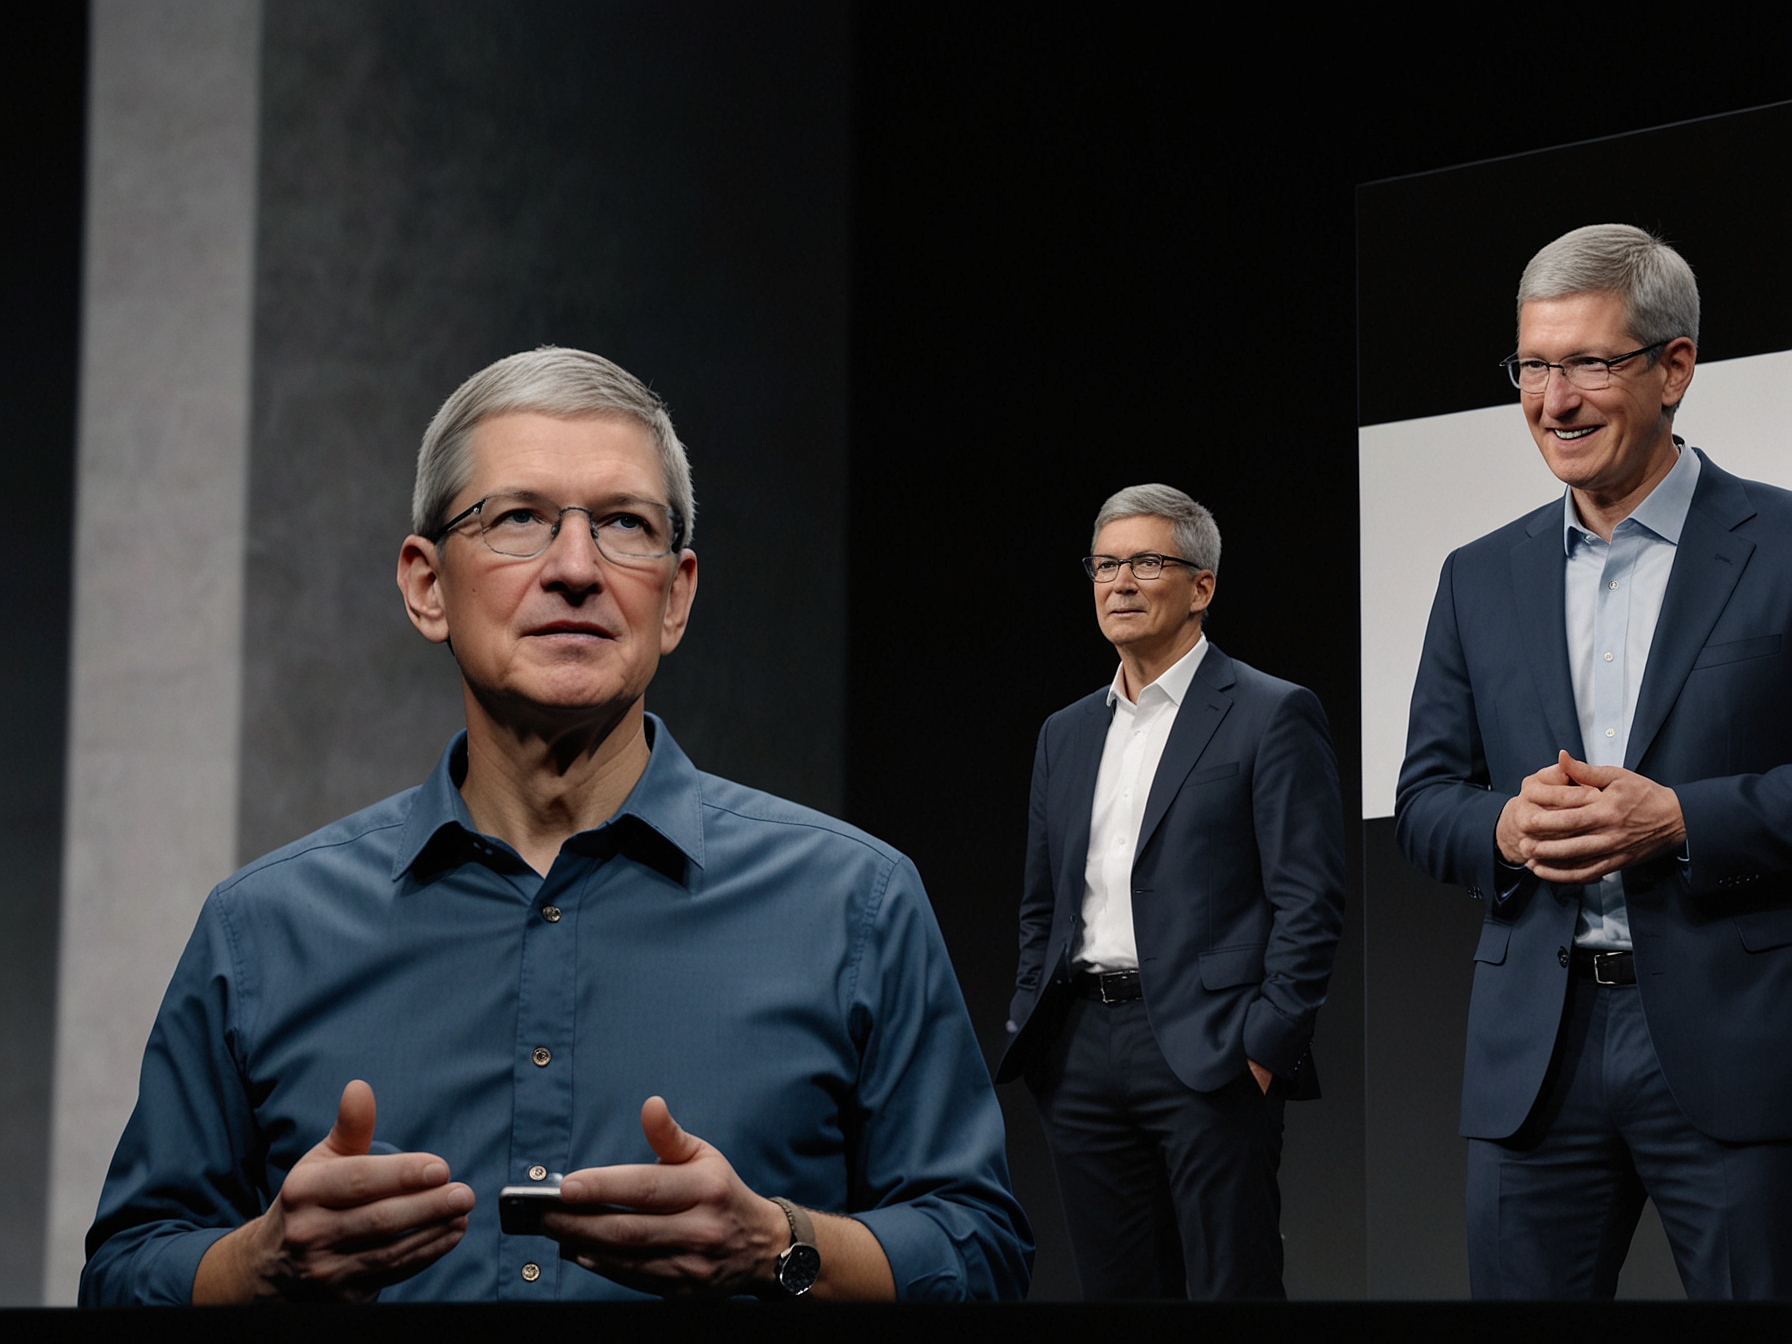 Tim Cook and Apple's executive team presenting the new AI-driven features at WWDC 2023, emphasizing improved predictive text, voice recognition, and advanced photo editing tools.